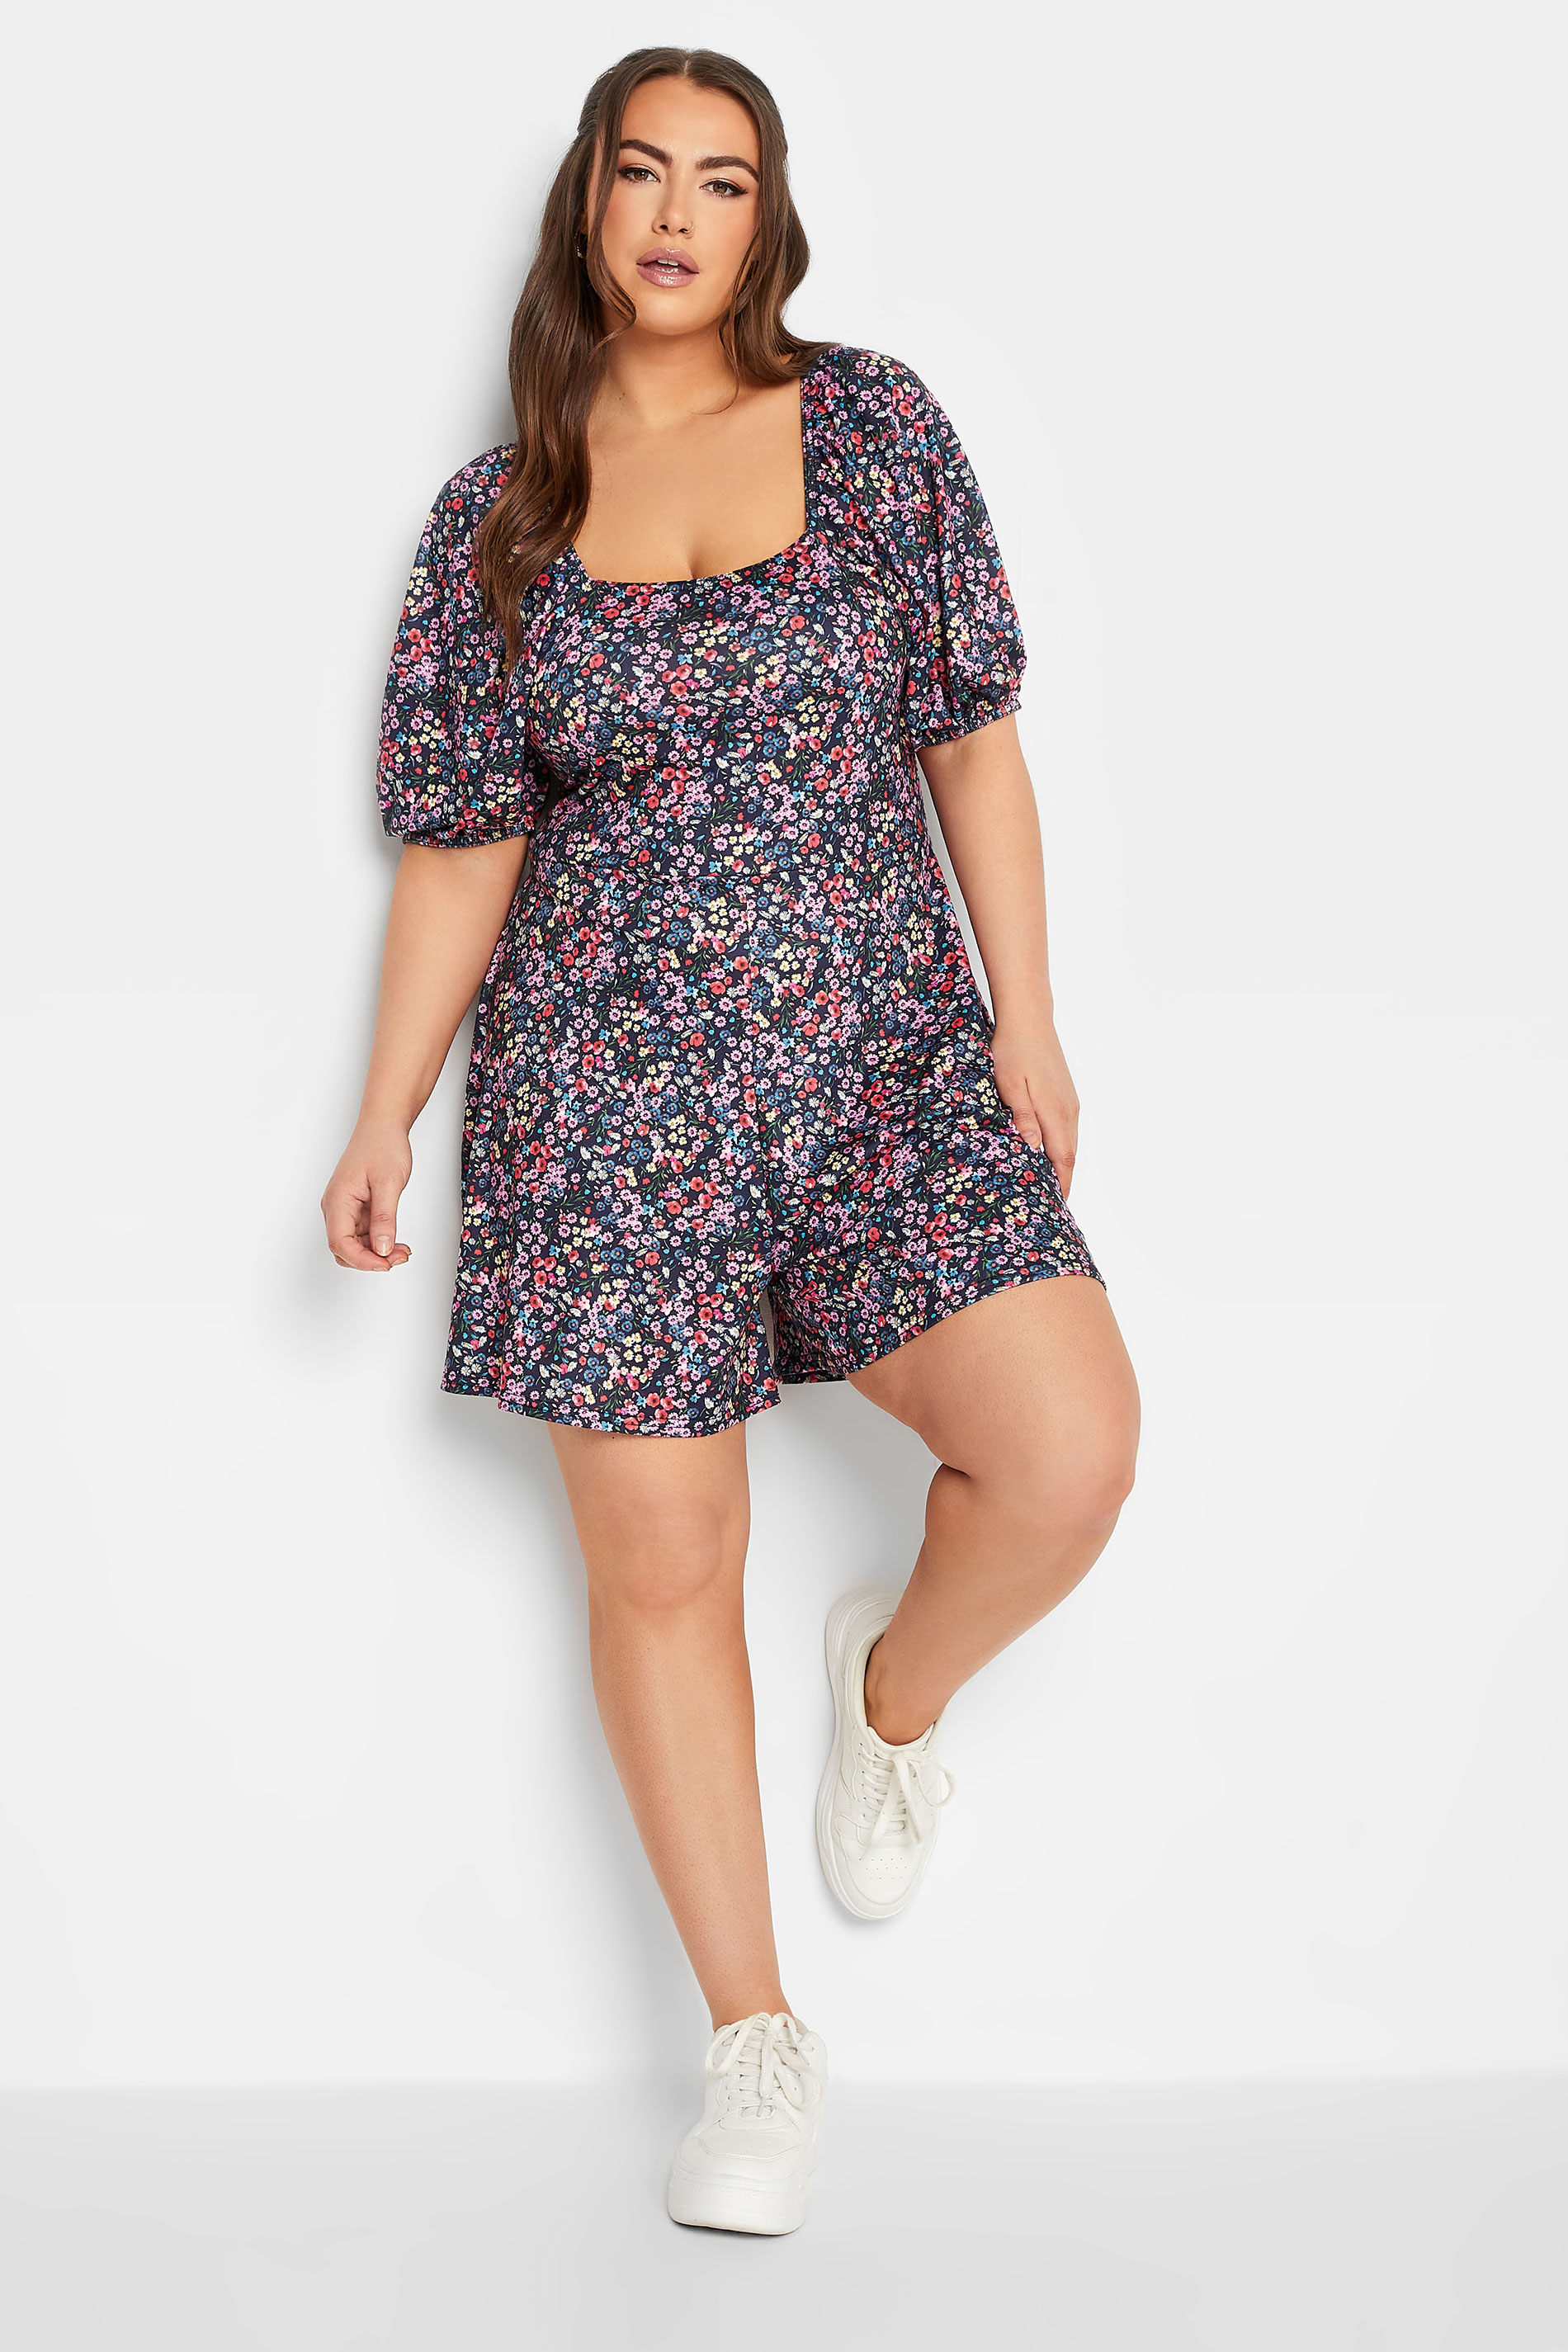 LIMITED COLLECTION Plus Size Navy Blue Floral Bow Back Playsuit | Yours Clothing 3